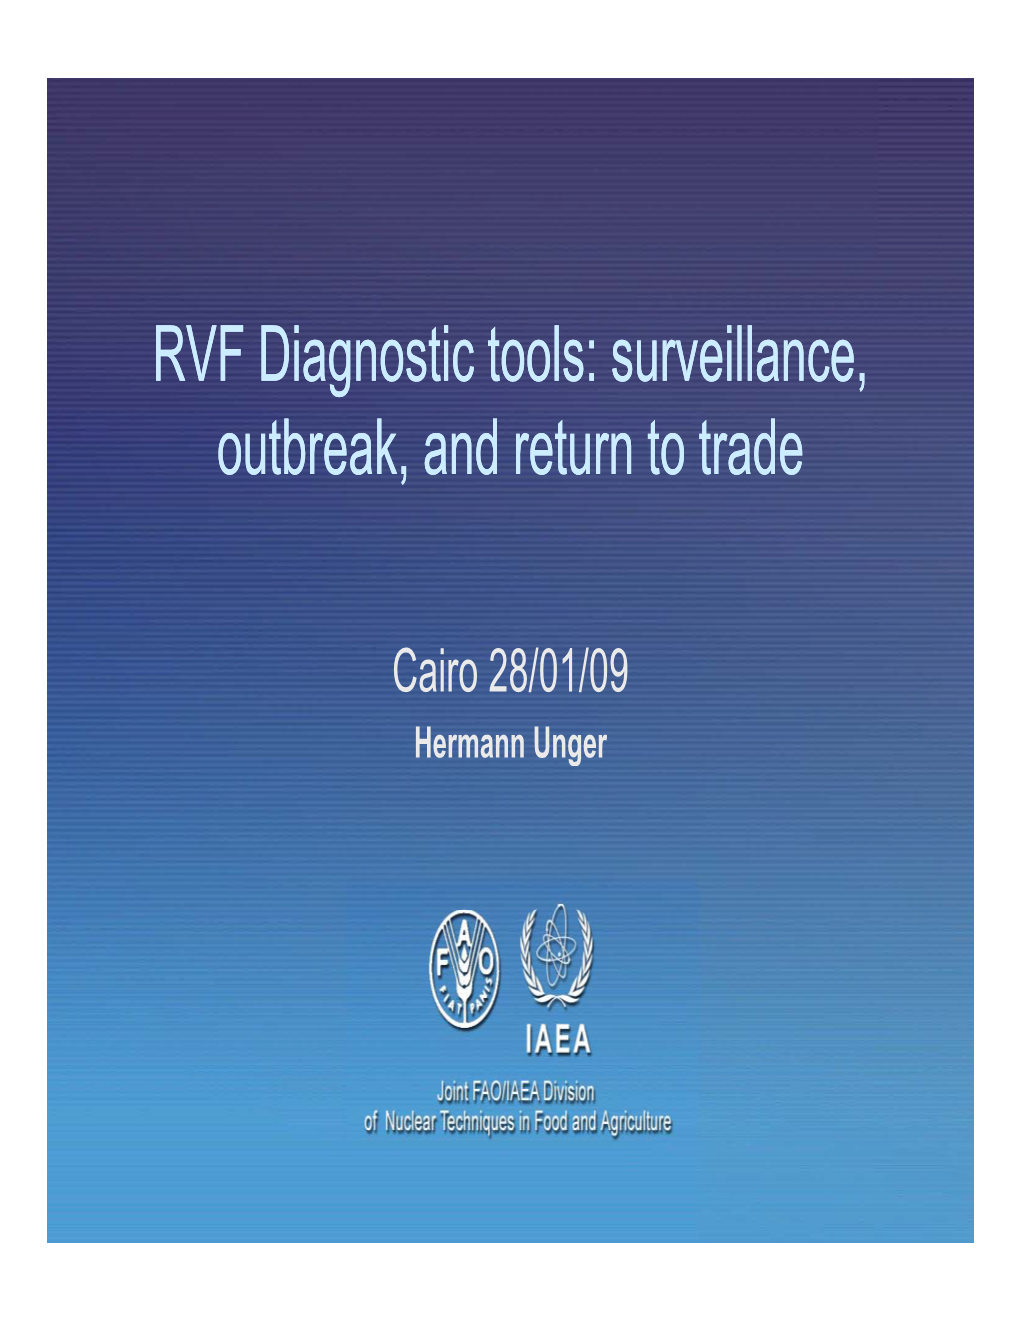 RVF Diagnostic Tools: Surveillance, Outbreak, and Return to Trade